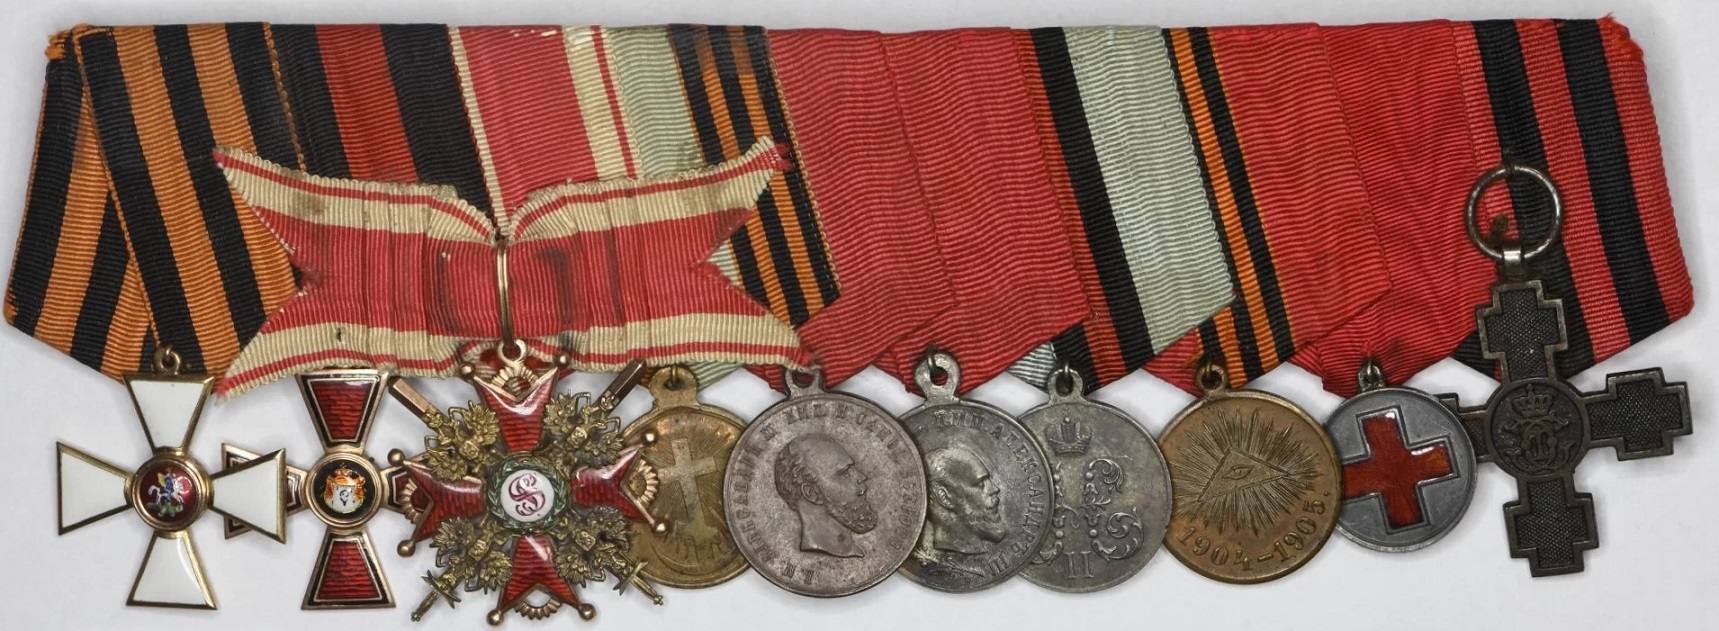 4th class St.George order and other awards of Infantry General Konstantin Mikhailovich Alekseev.jpg